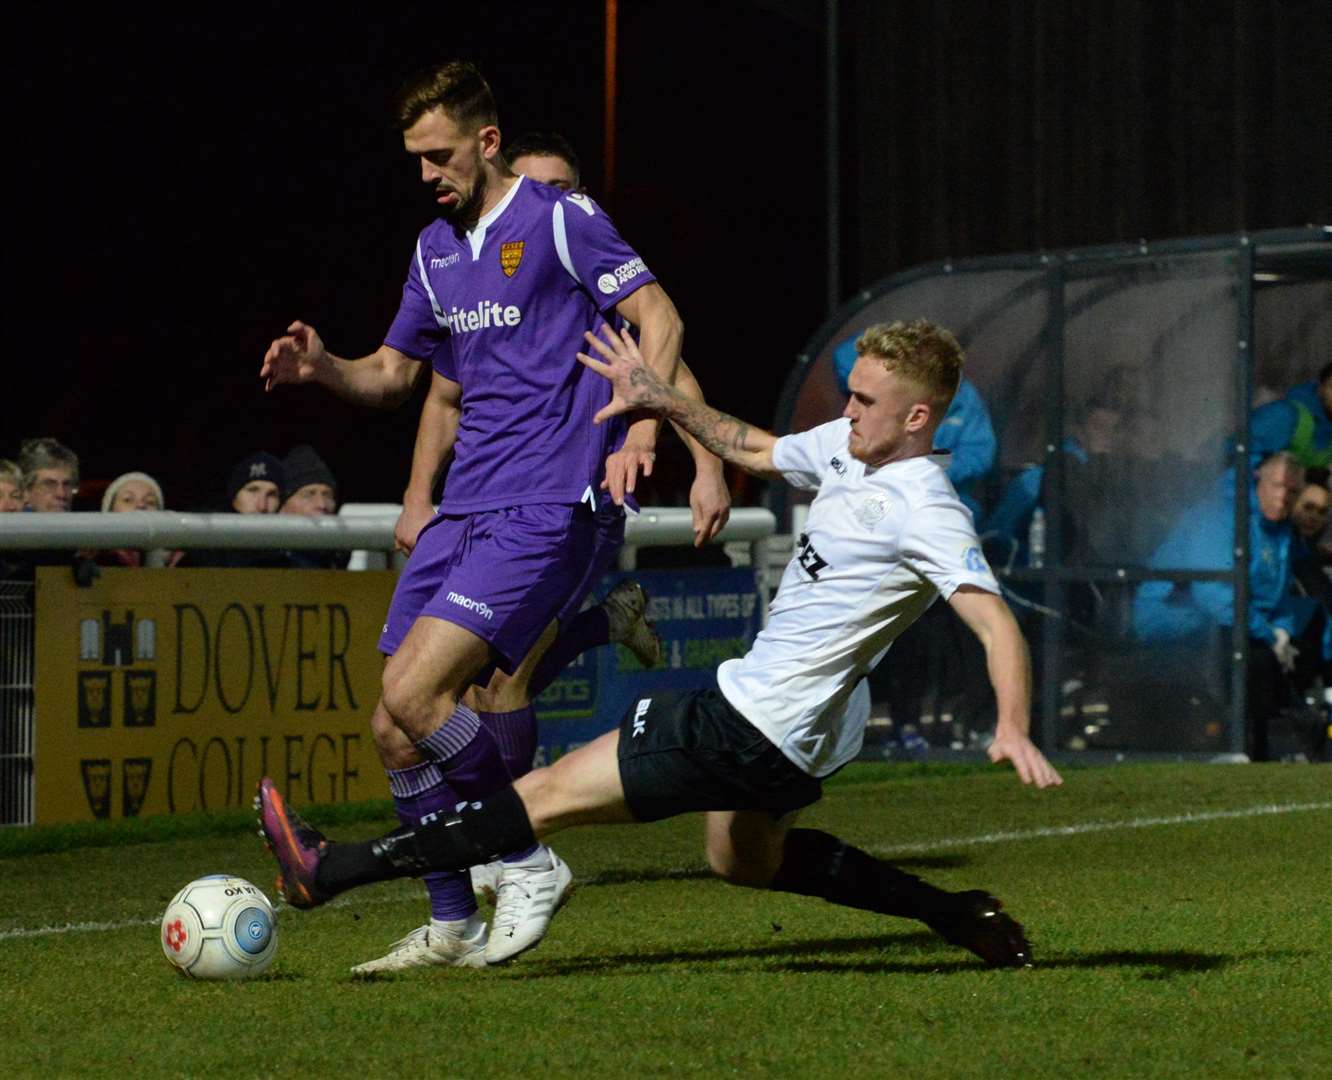 Former Maidstone man Bobby-Joe Taylor tackles Jack Powell Picture: Chris Davey